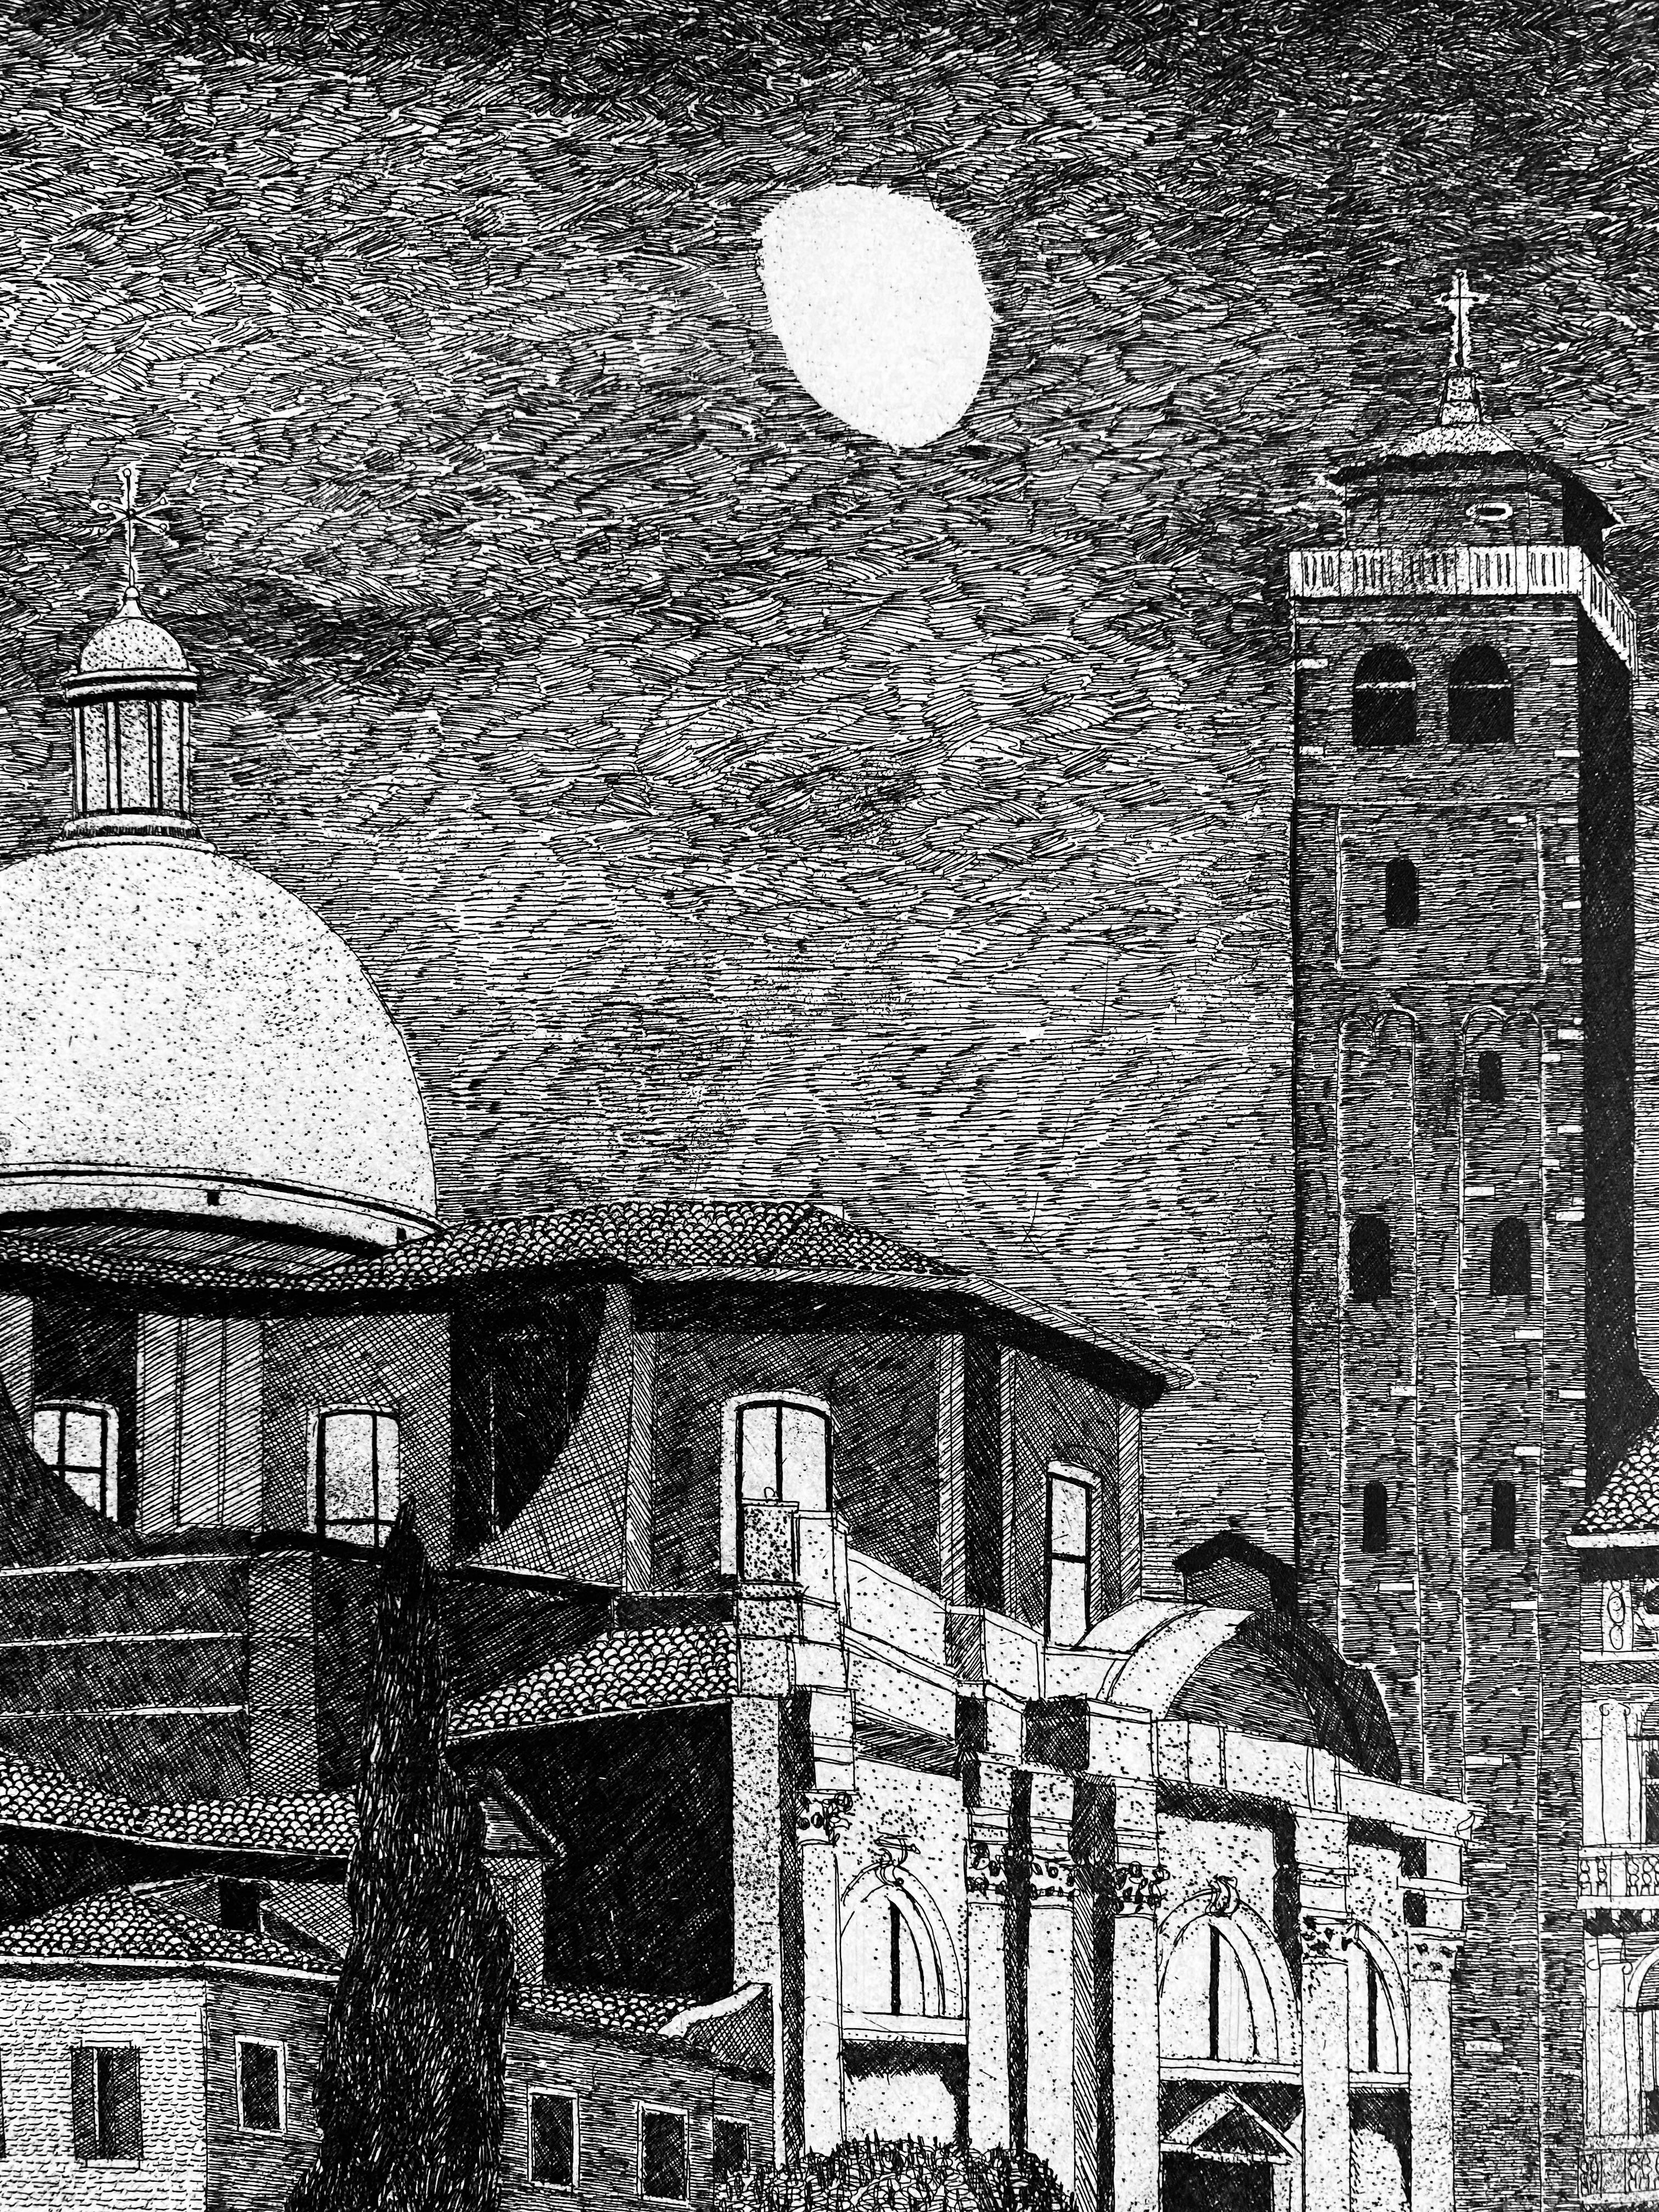 Nocturne landscape of Venezia, Cannaregio and Palazzo Labia, with the moon, rif. 543

The etching was exhibited last year in the critical retrospective that the city of Milan promoted and set up to mark the tenth anniversary of her death. Milan's